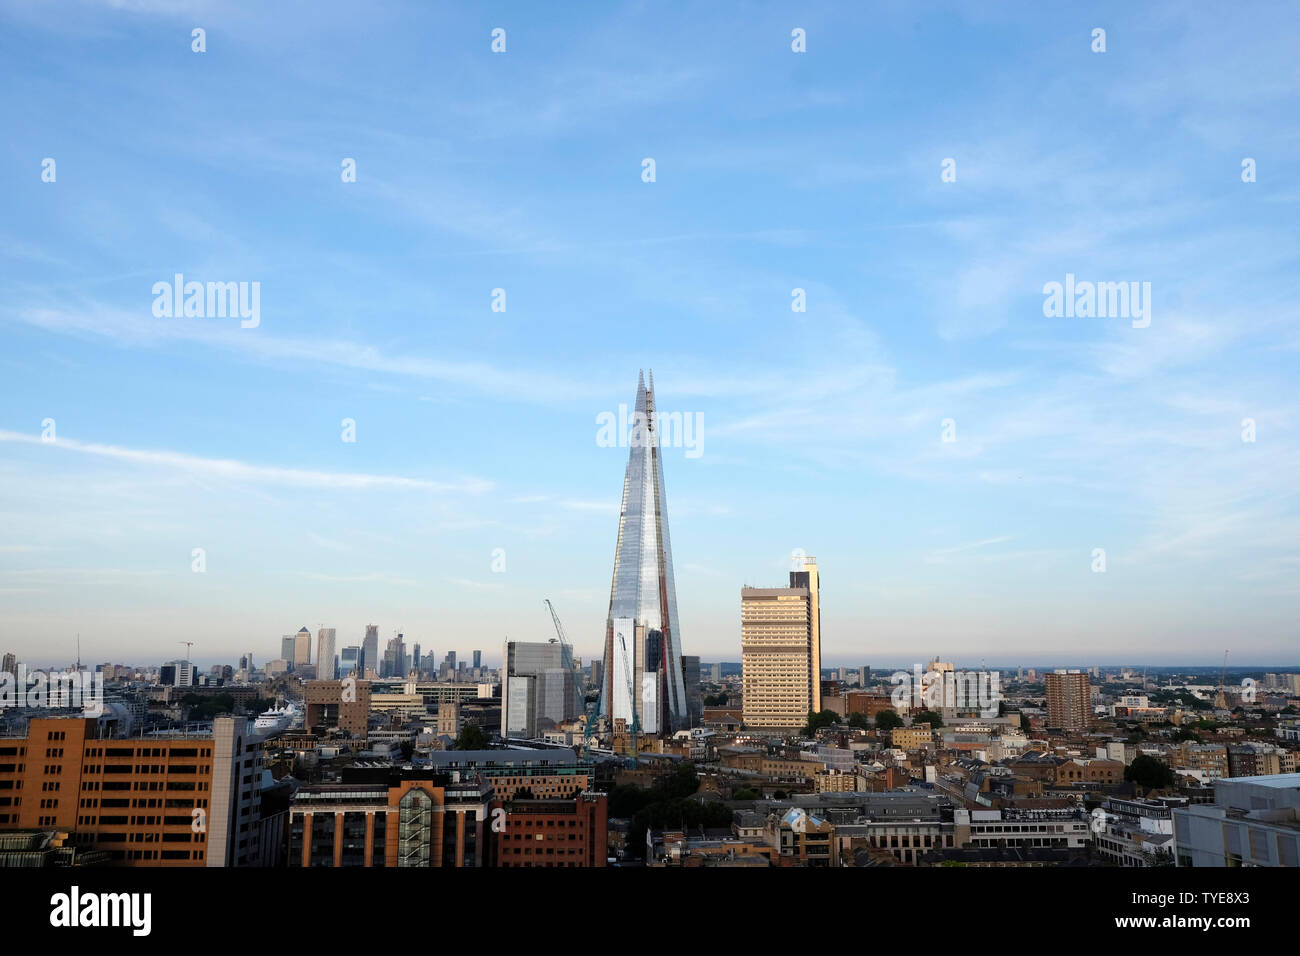 View of London skyline from the viewing platform at the Tate Modern, London, UK. Stock Photo